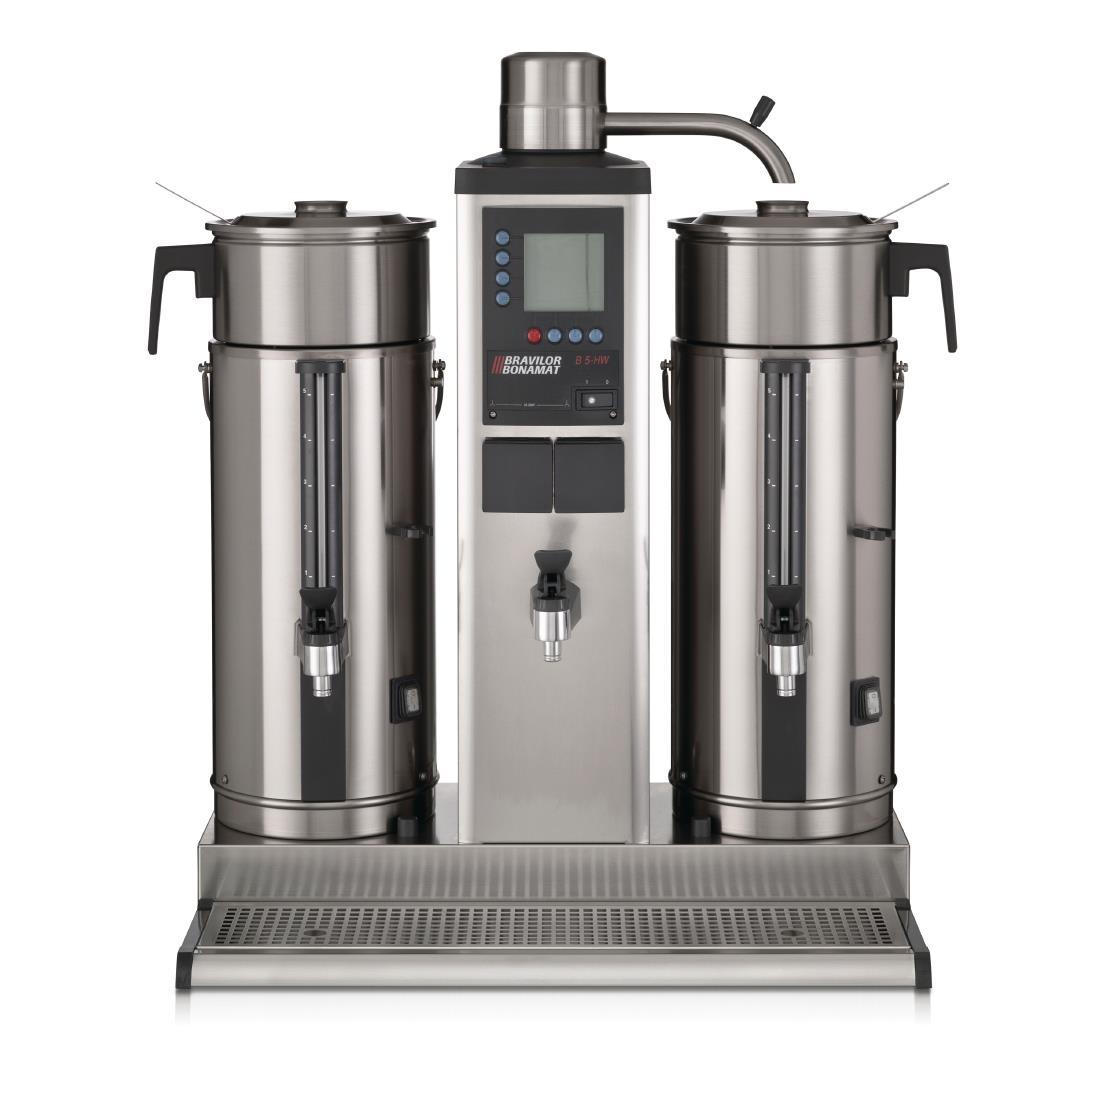 Bravilor B5 HW Bulk Coffee Brewer with 2x5Ltr Coffee Urns and Hot Water Tap Three Phase - DC687-3P  - 2